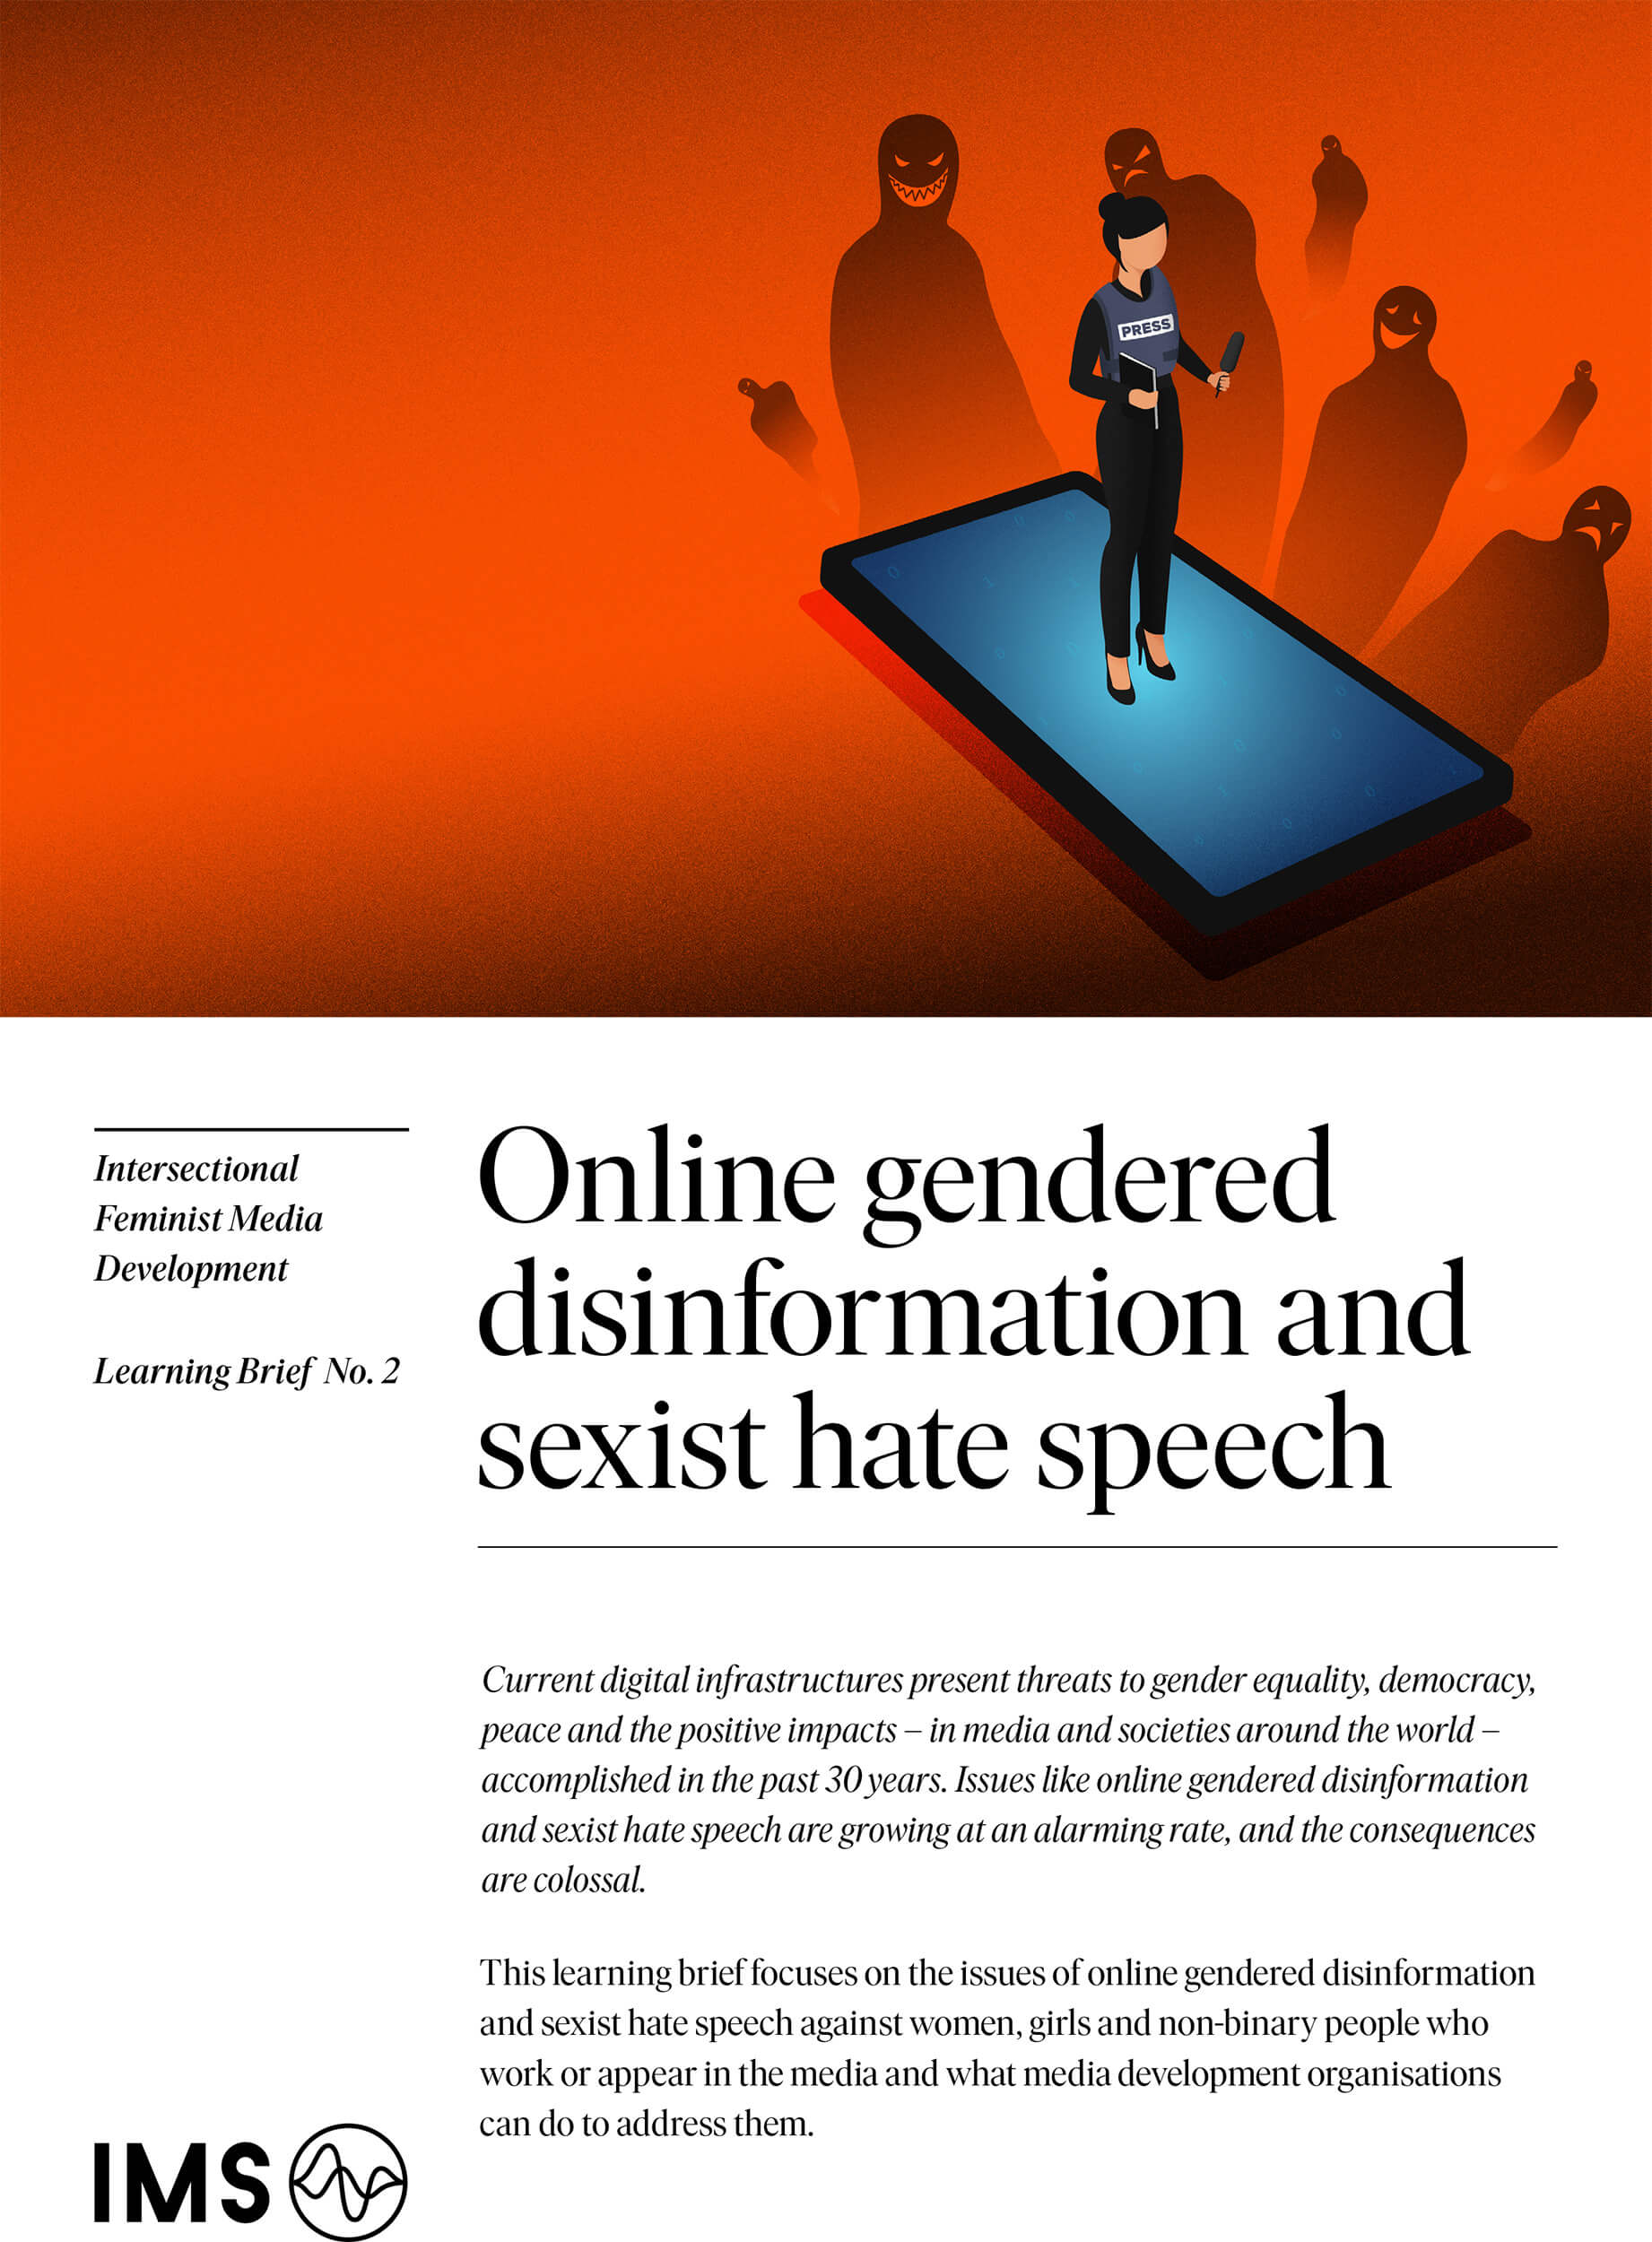 Online gendered disinformation and sexist hate speech